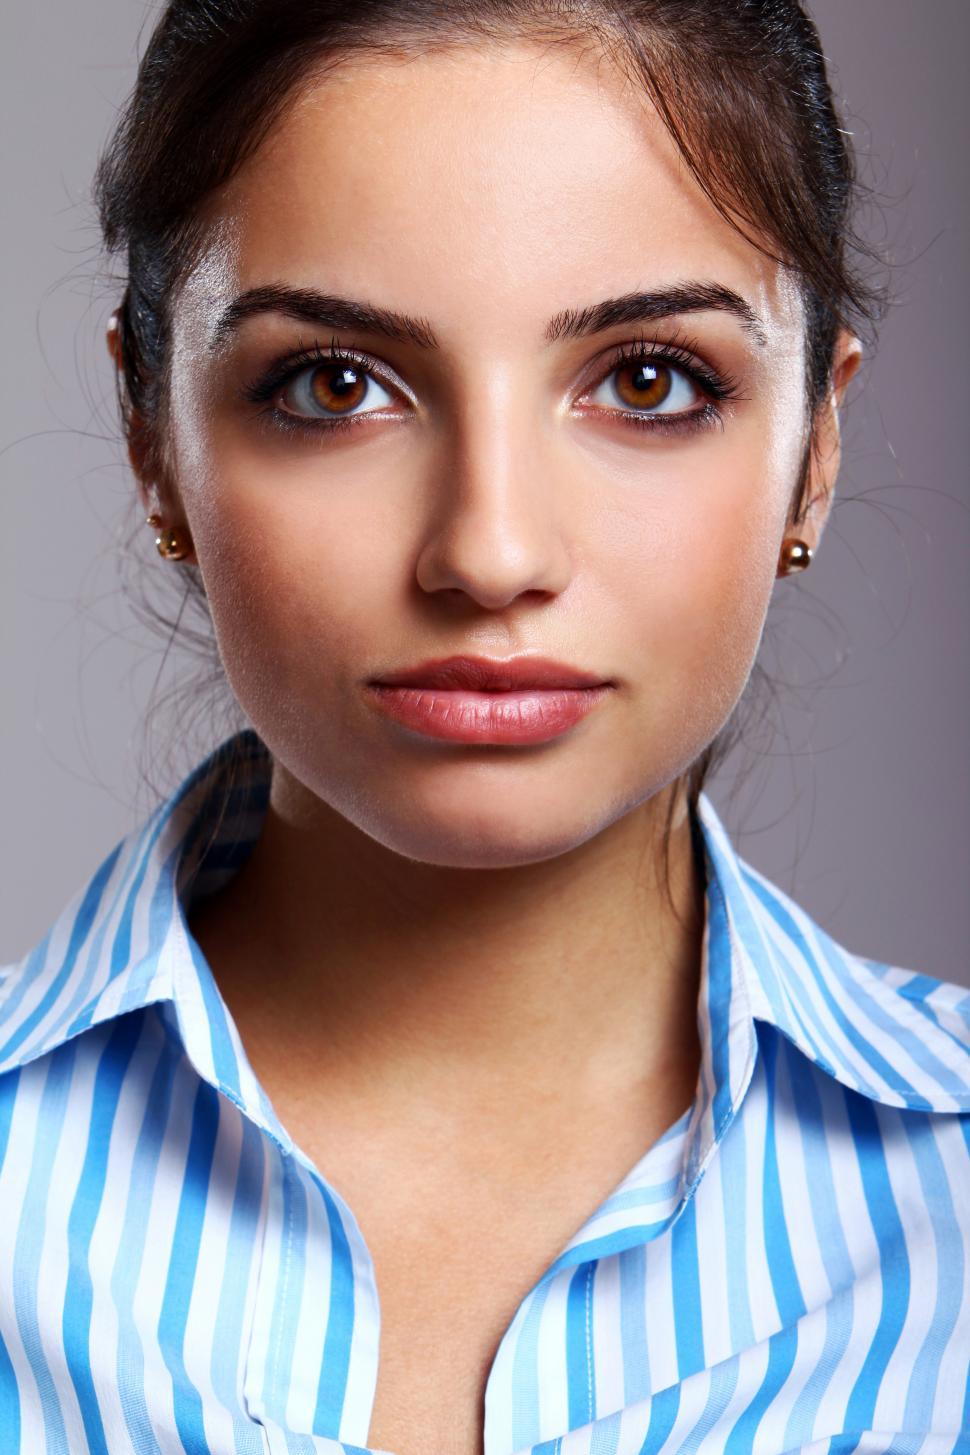 Free Image of Portrait of young woman in striped blouse 